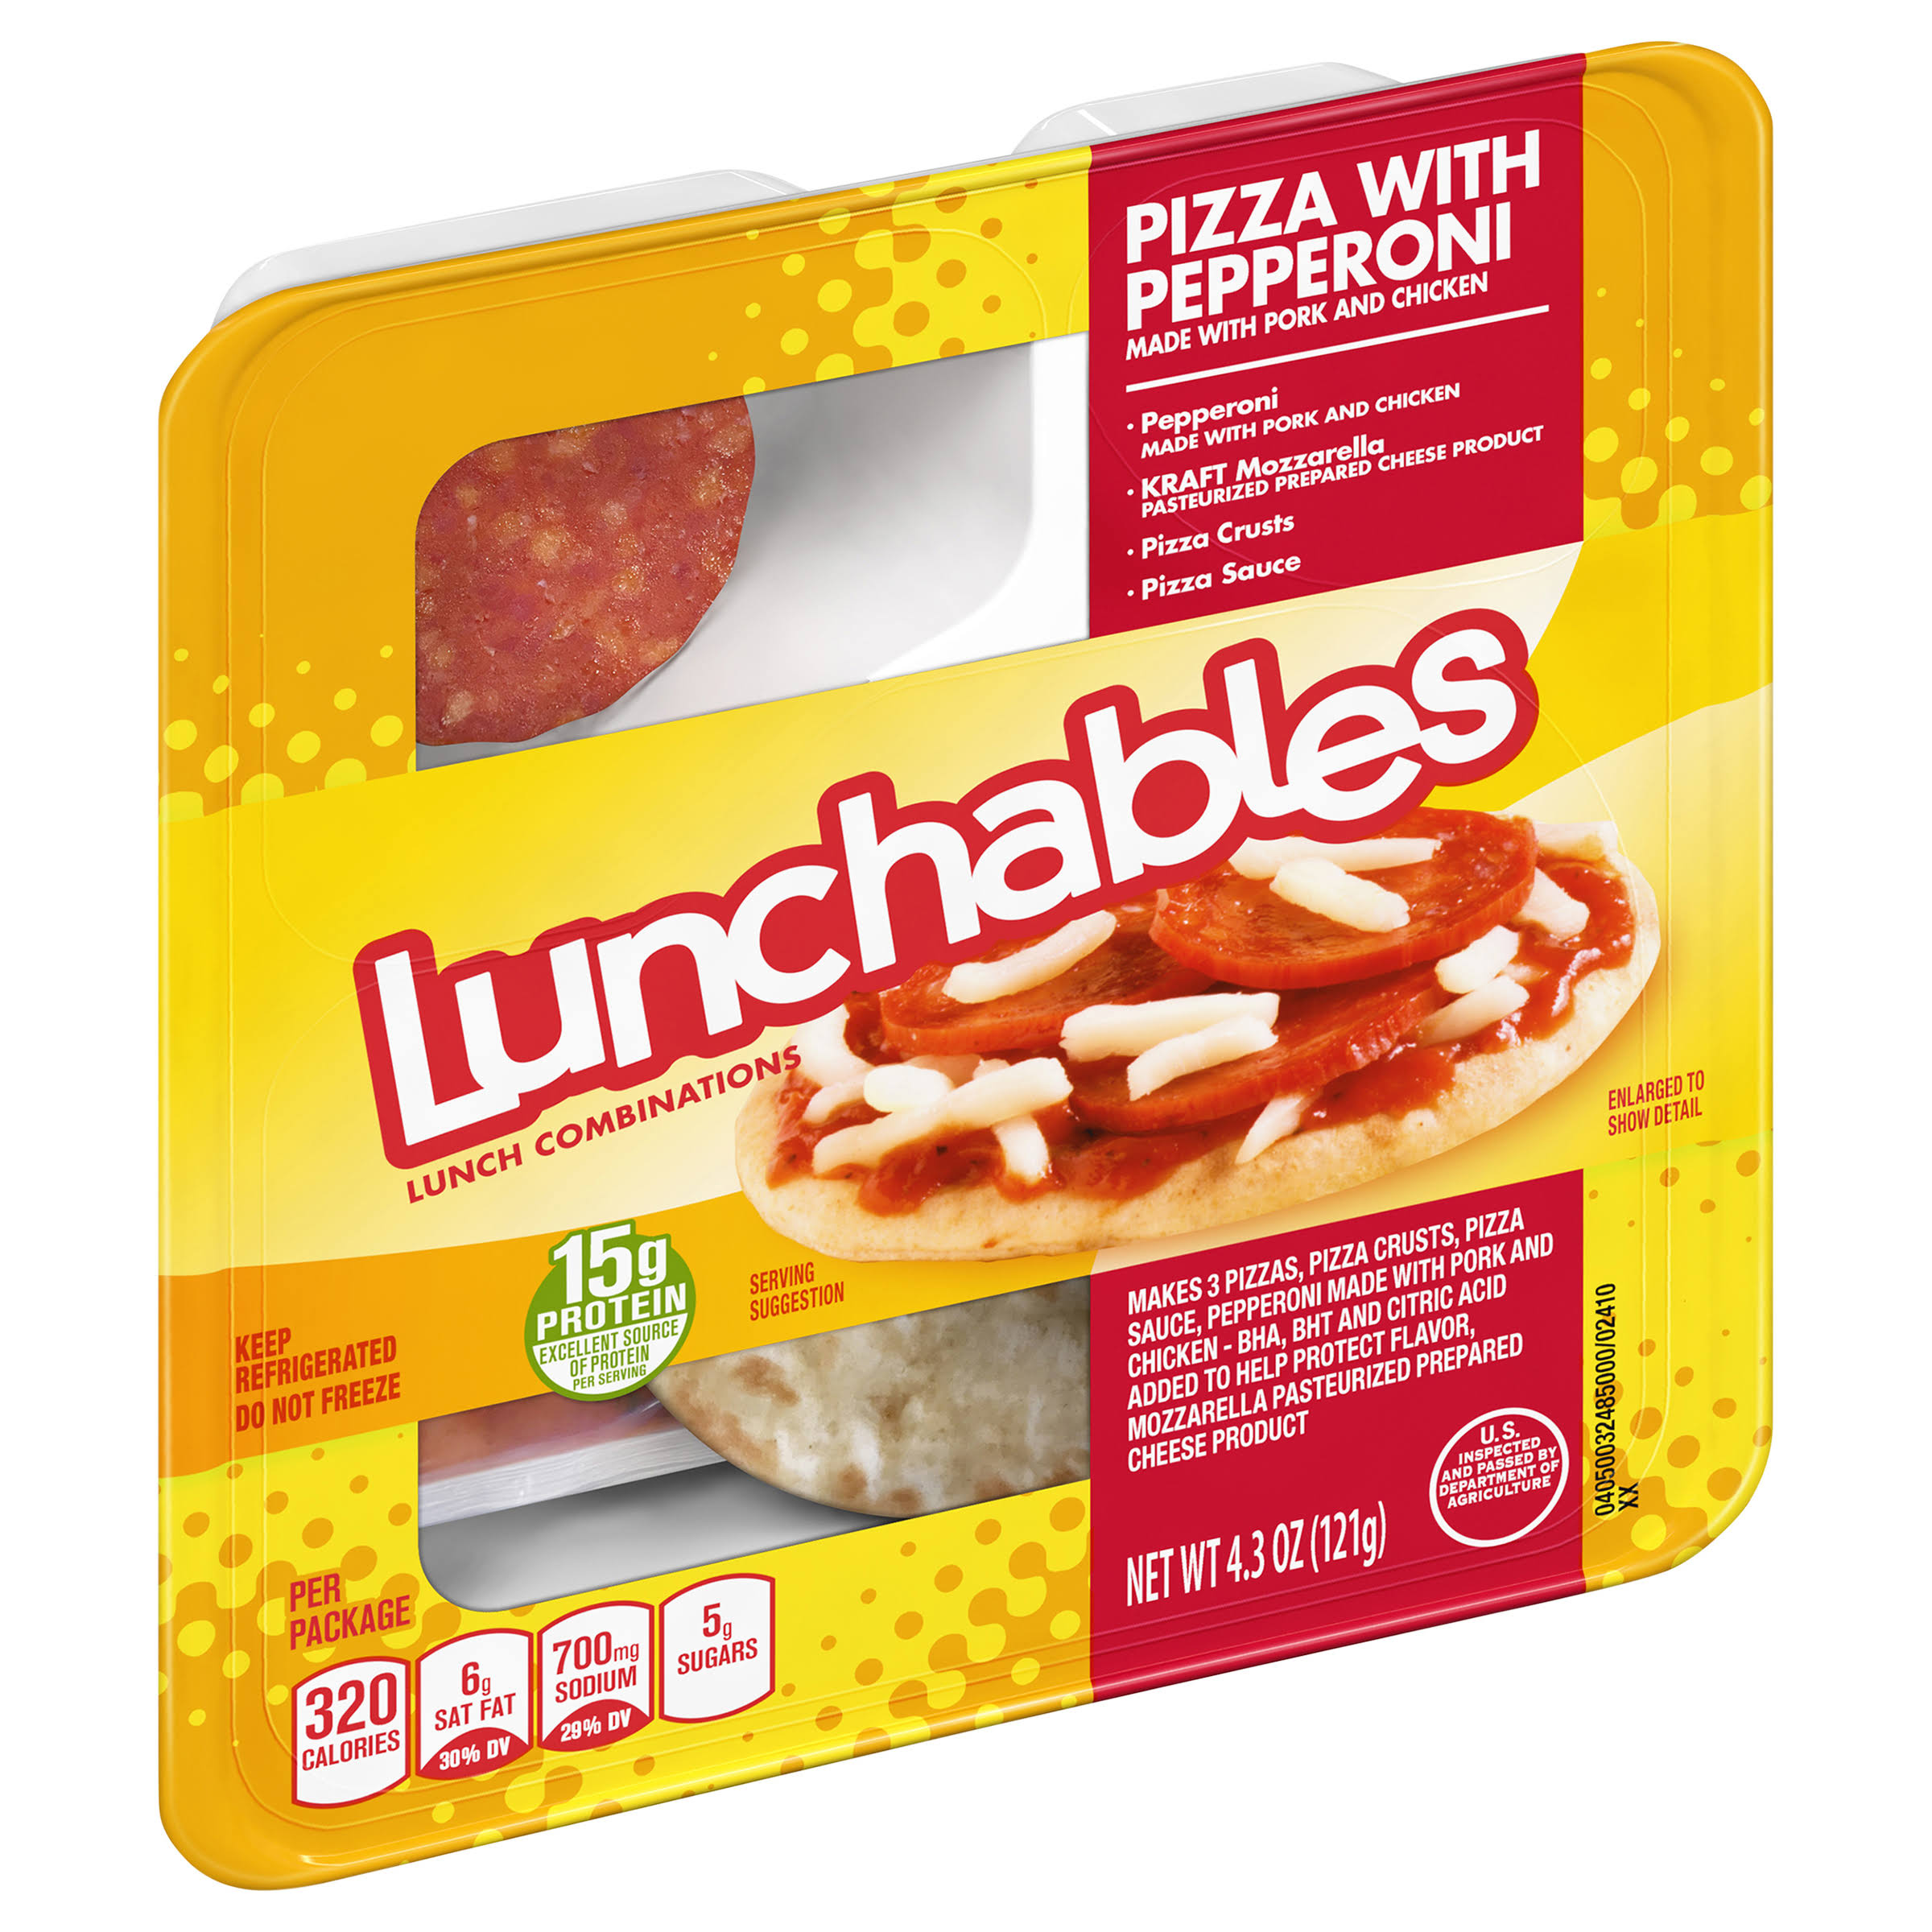 Lunchables Lunch Combinations - Pizza With Pepperoni, 4.3oz